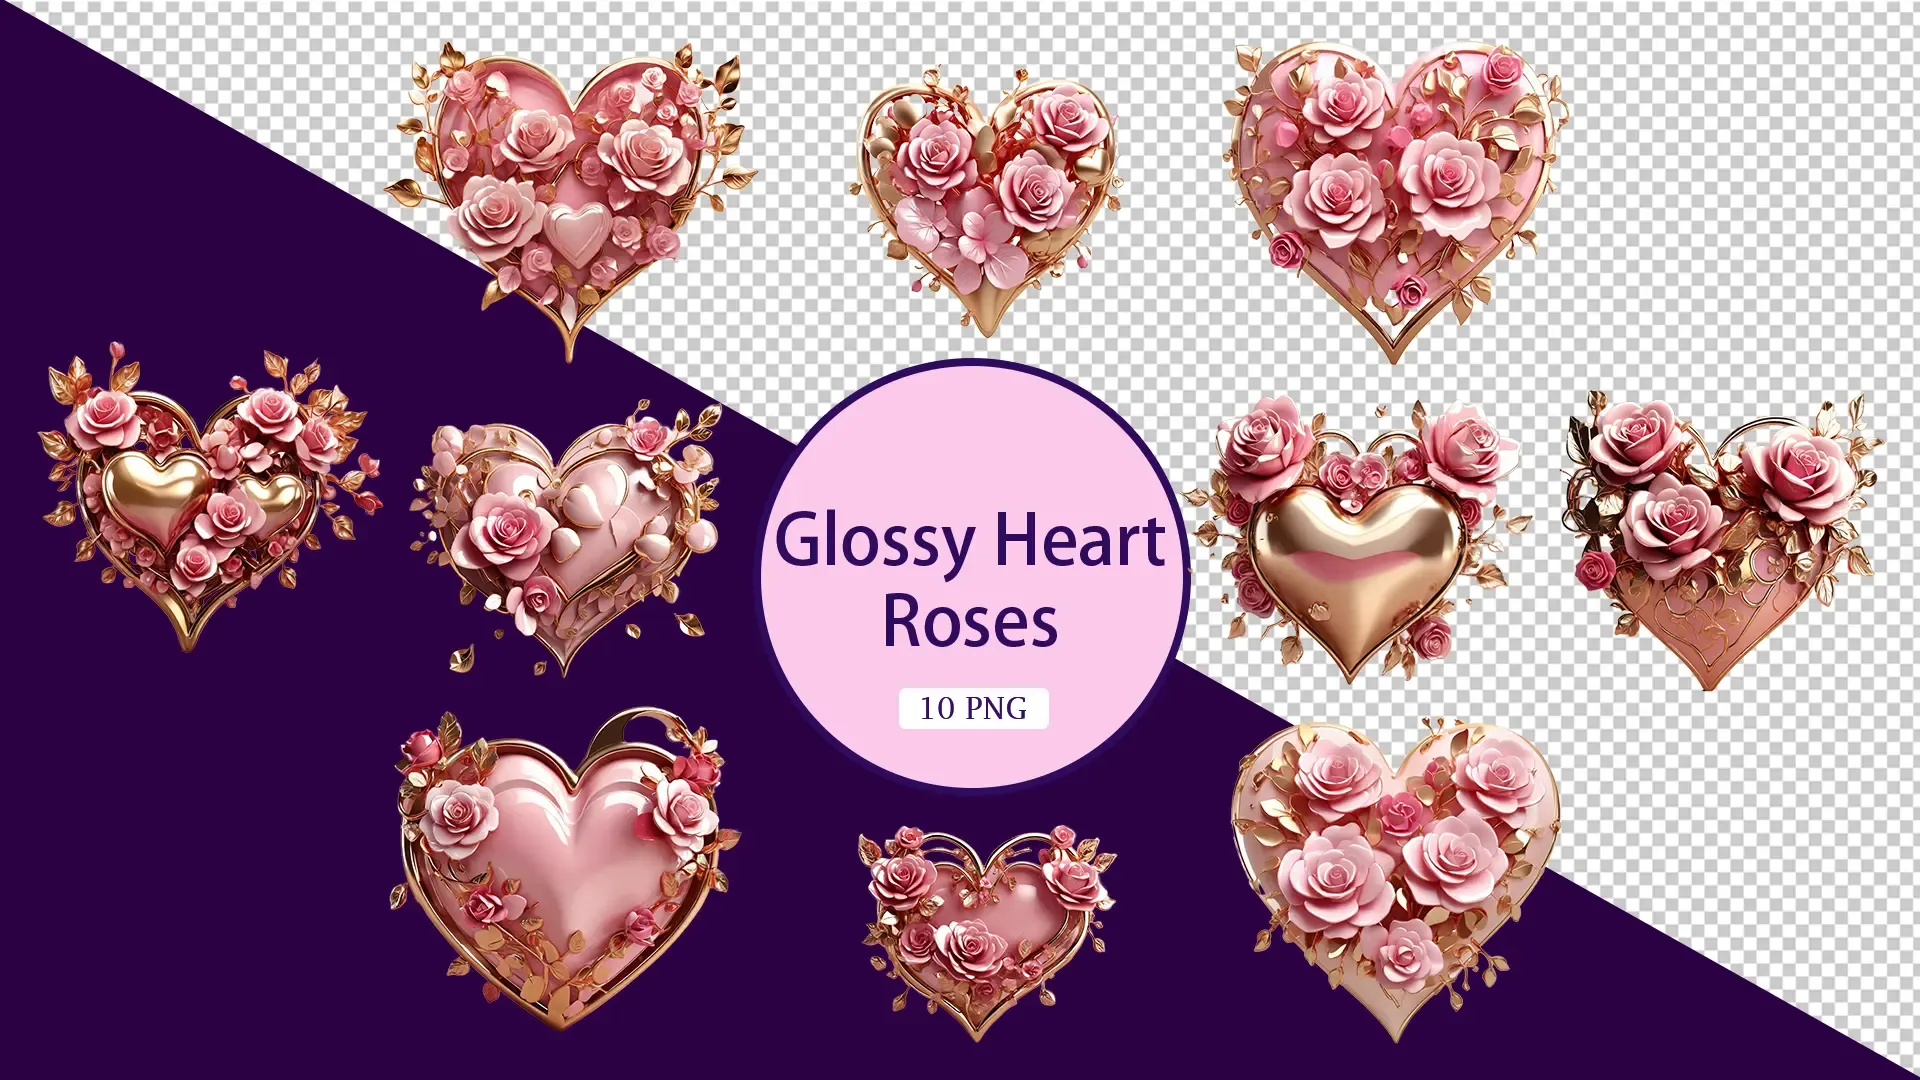 Luxurious 3D Glossy Heart Roses Pack image